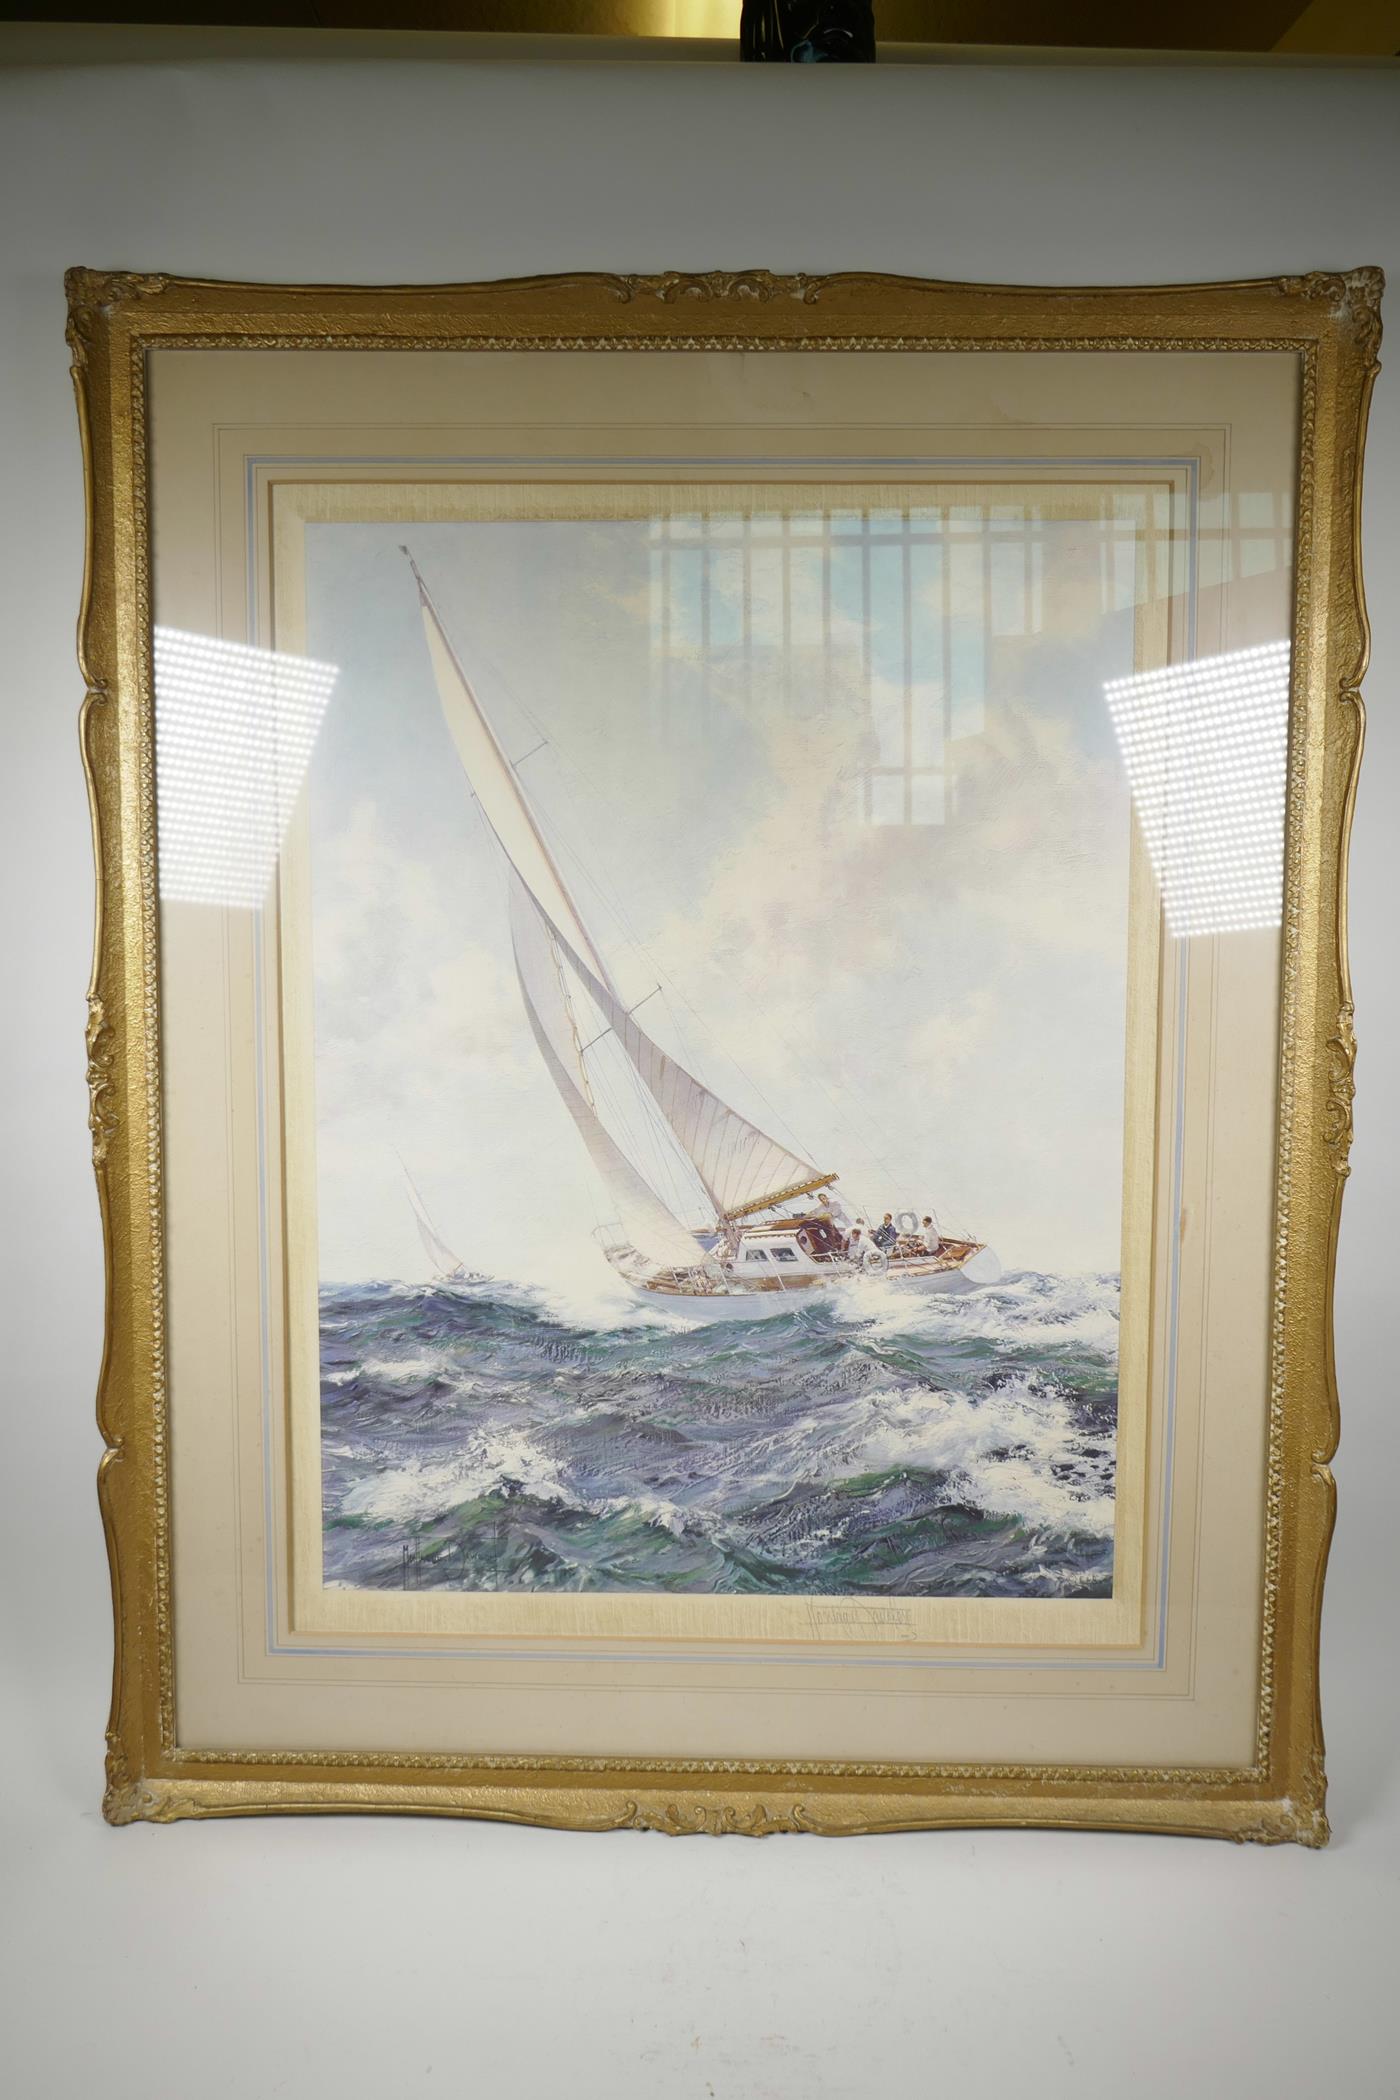 Montague Dawson, lithograph of sailing yachts at sea, pencil signed in the margin, 19" x 28" - Image 3 of 4